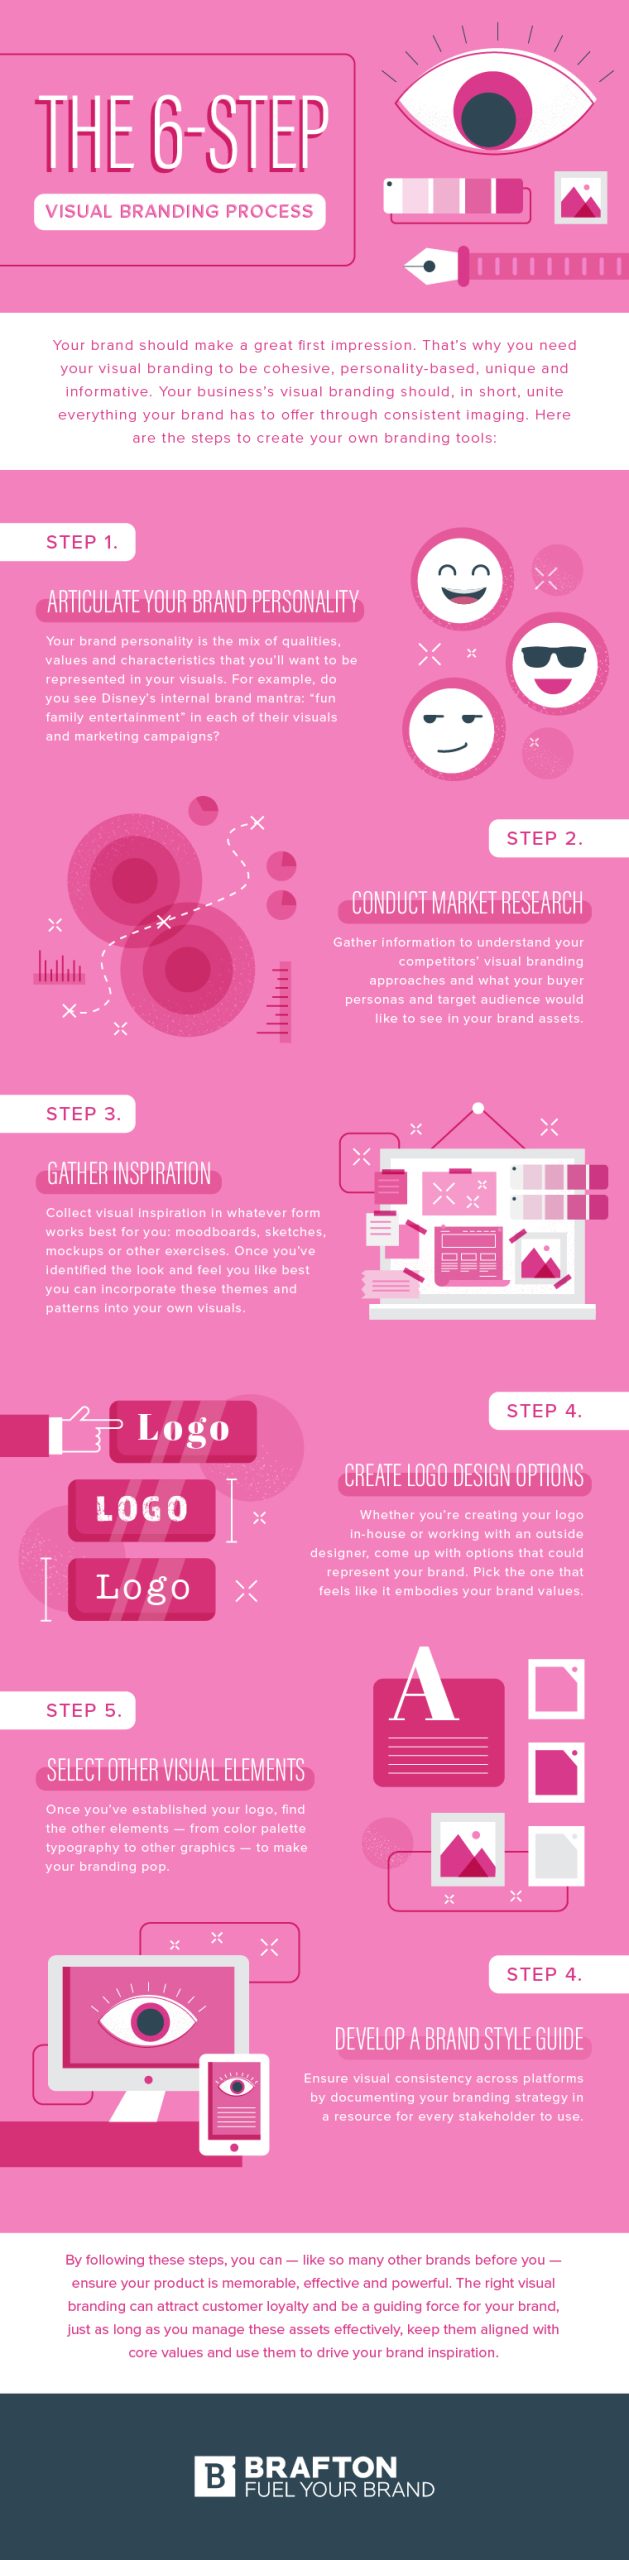 Visual branding: The essential guide to building your visual brand